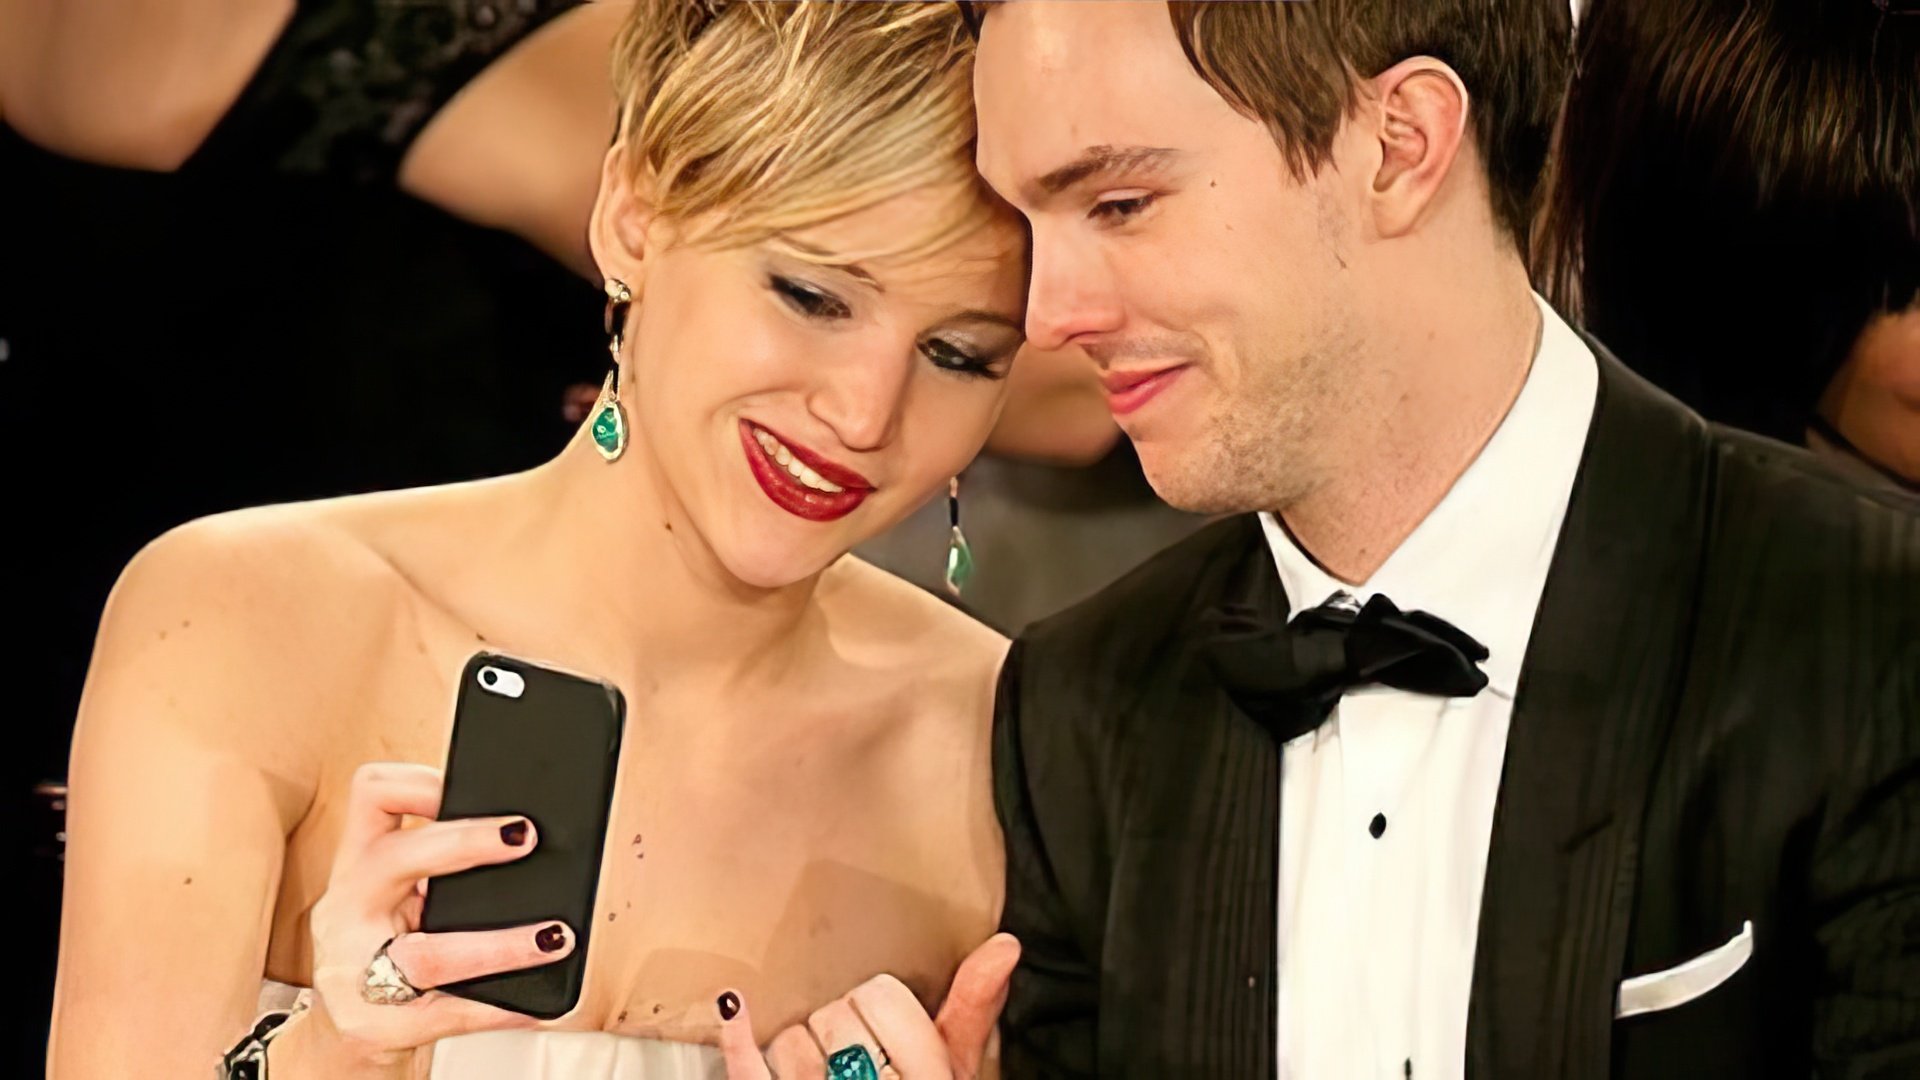 Nicholas Hoult dated Jennifer Lawrence for quite some time